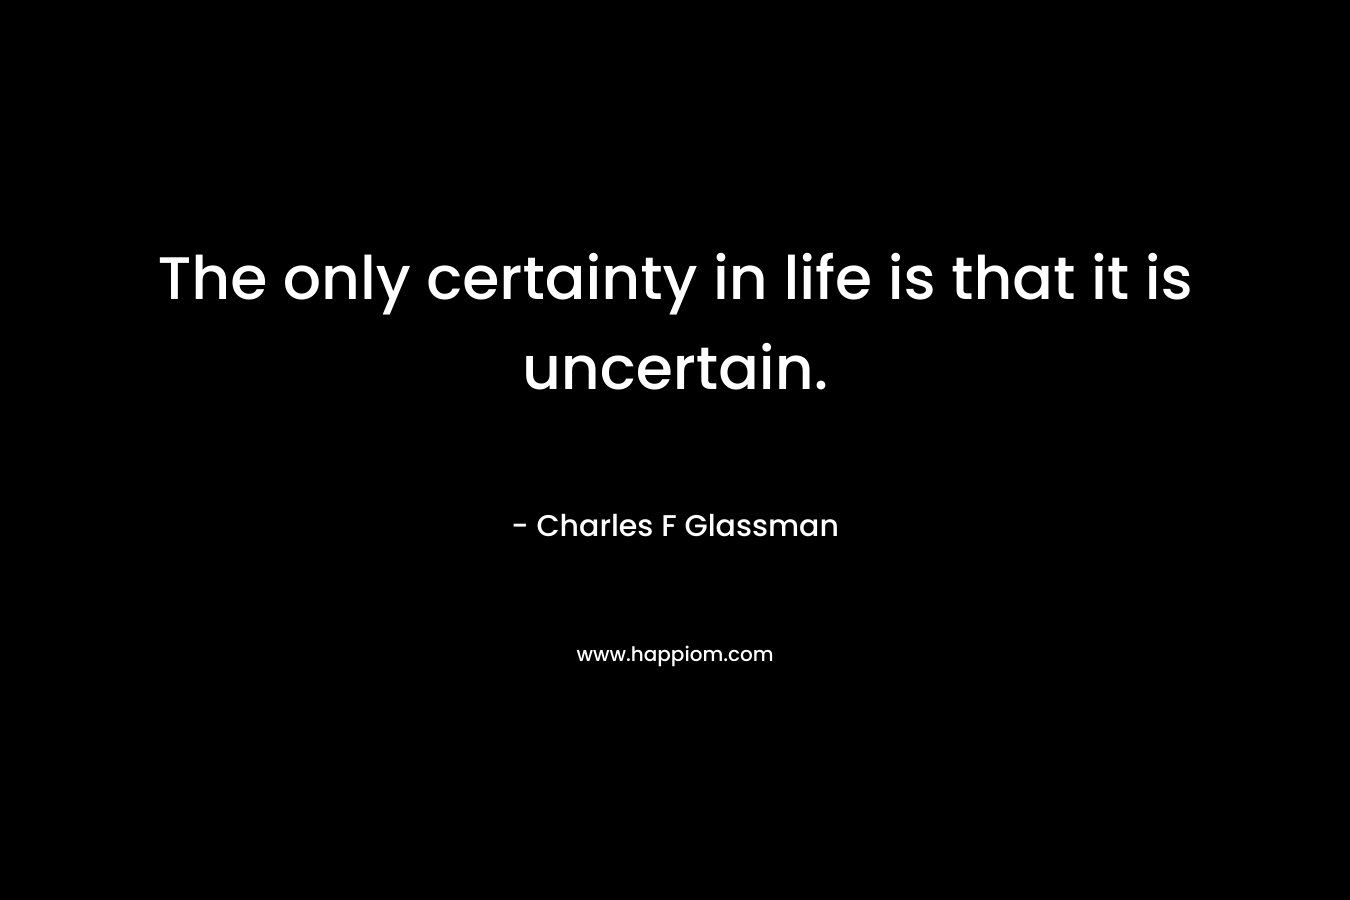 The only certainty in life is that it is uncertain.